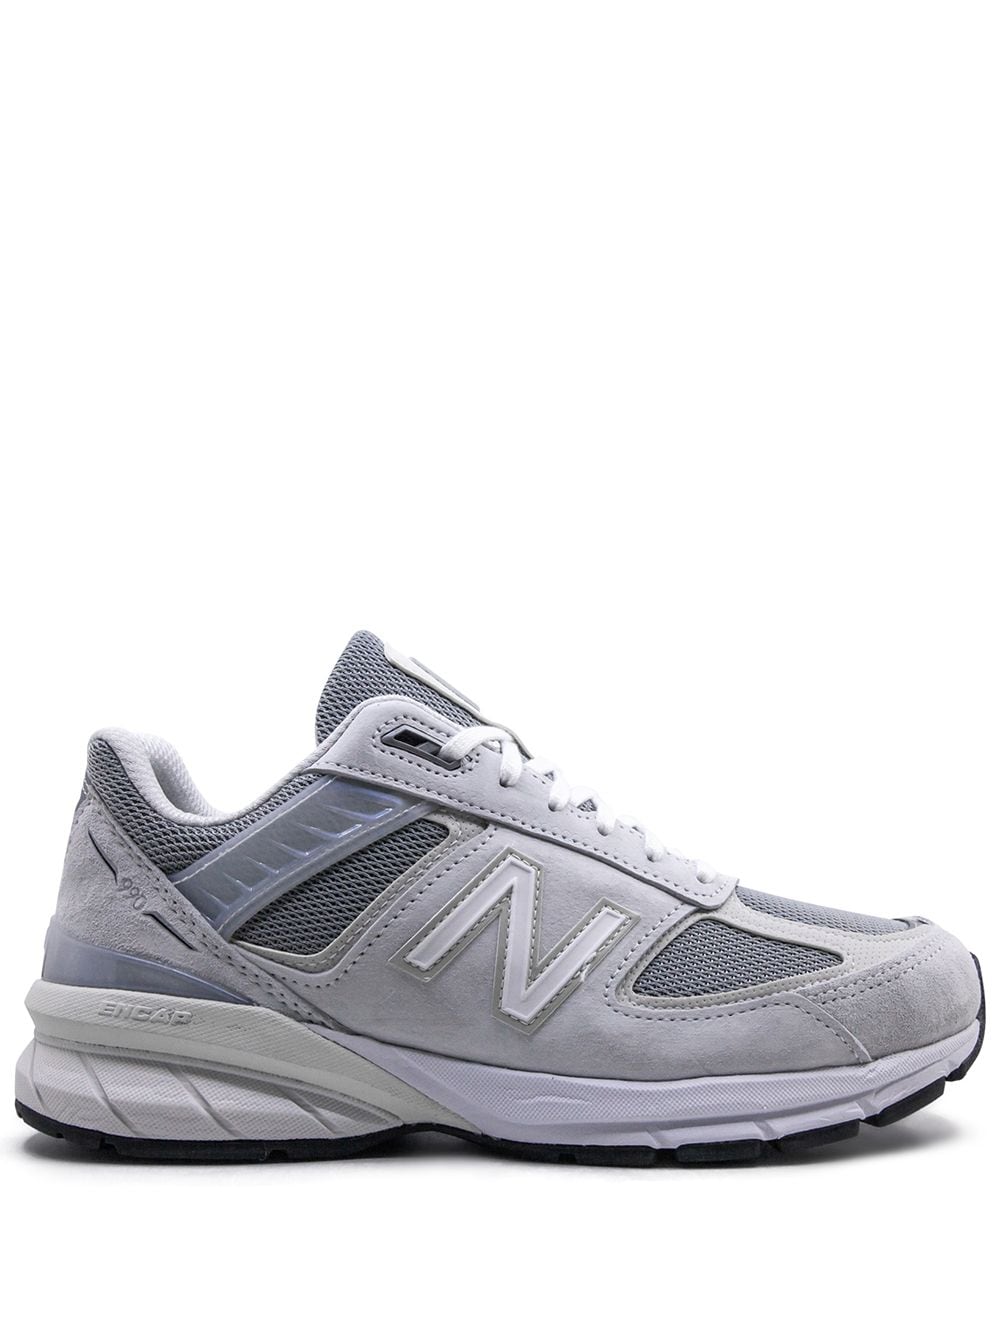 Shop New Balance 990 low-top sneakers with Afterpay - Farfetch Australia